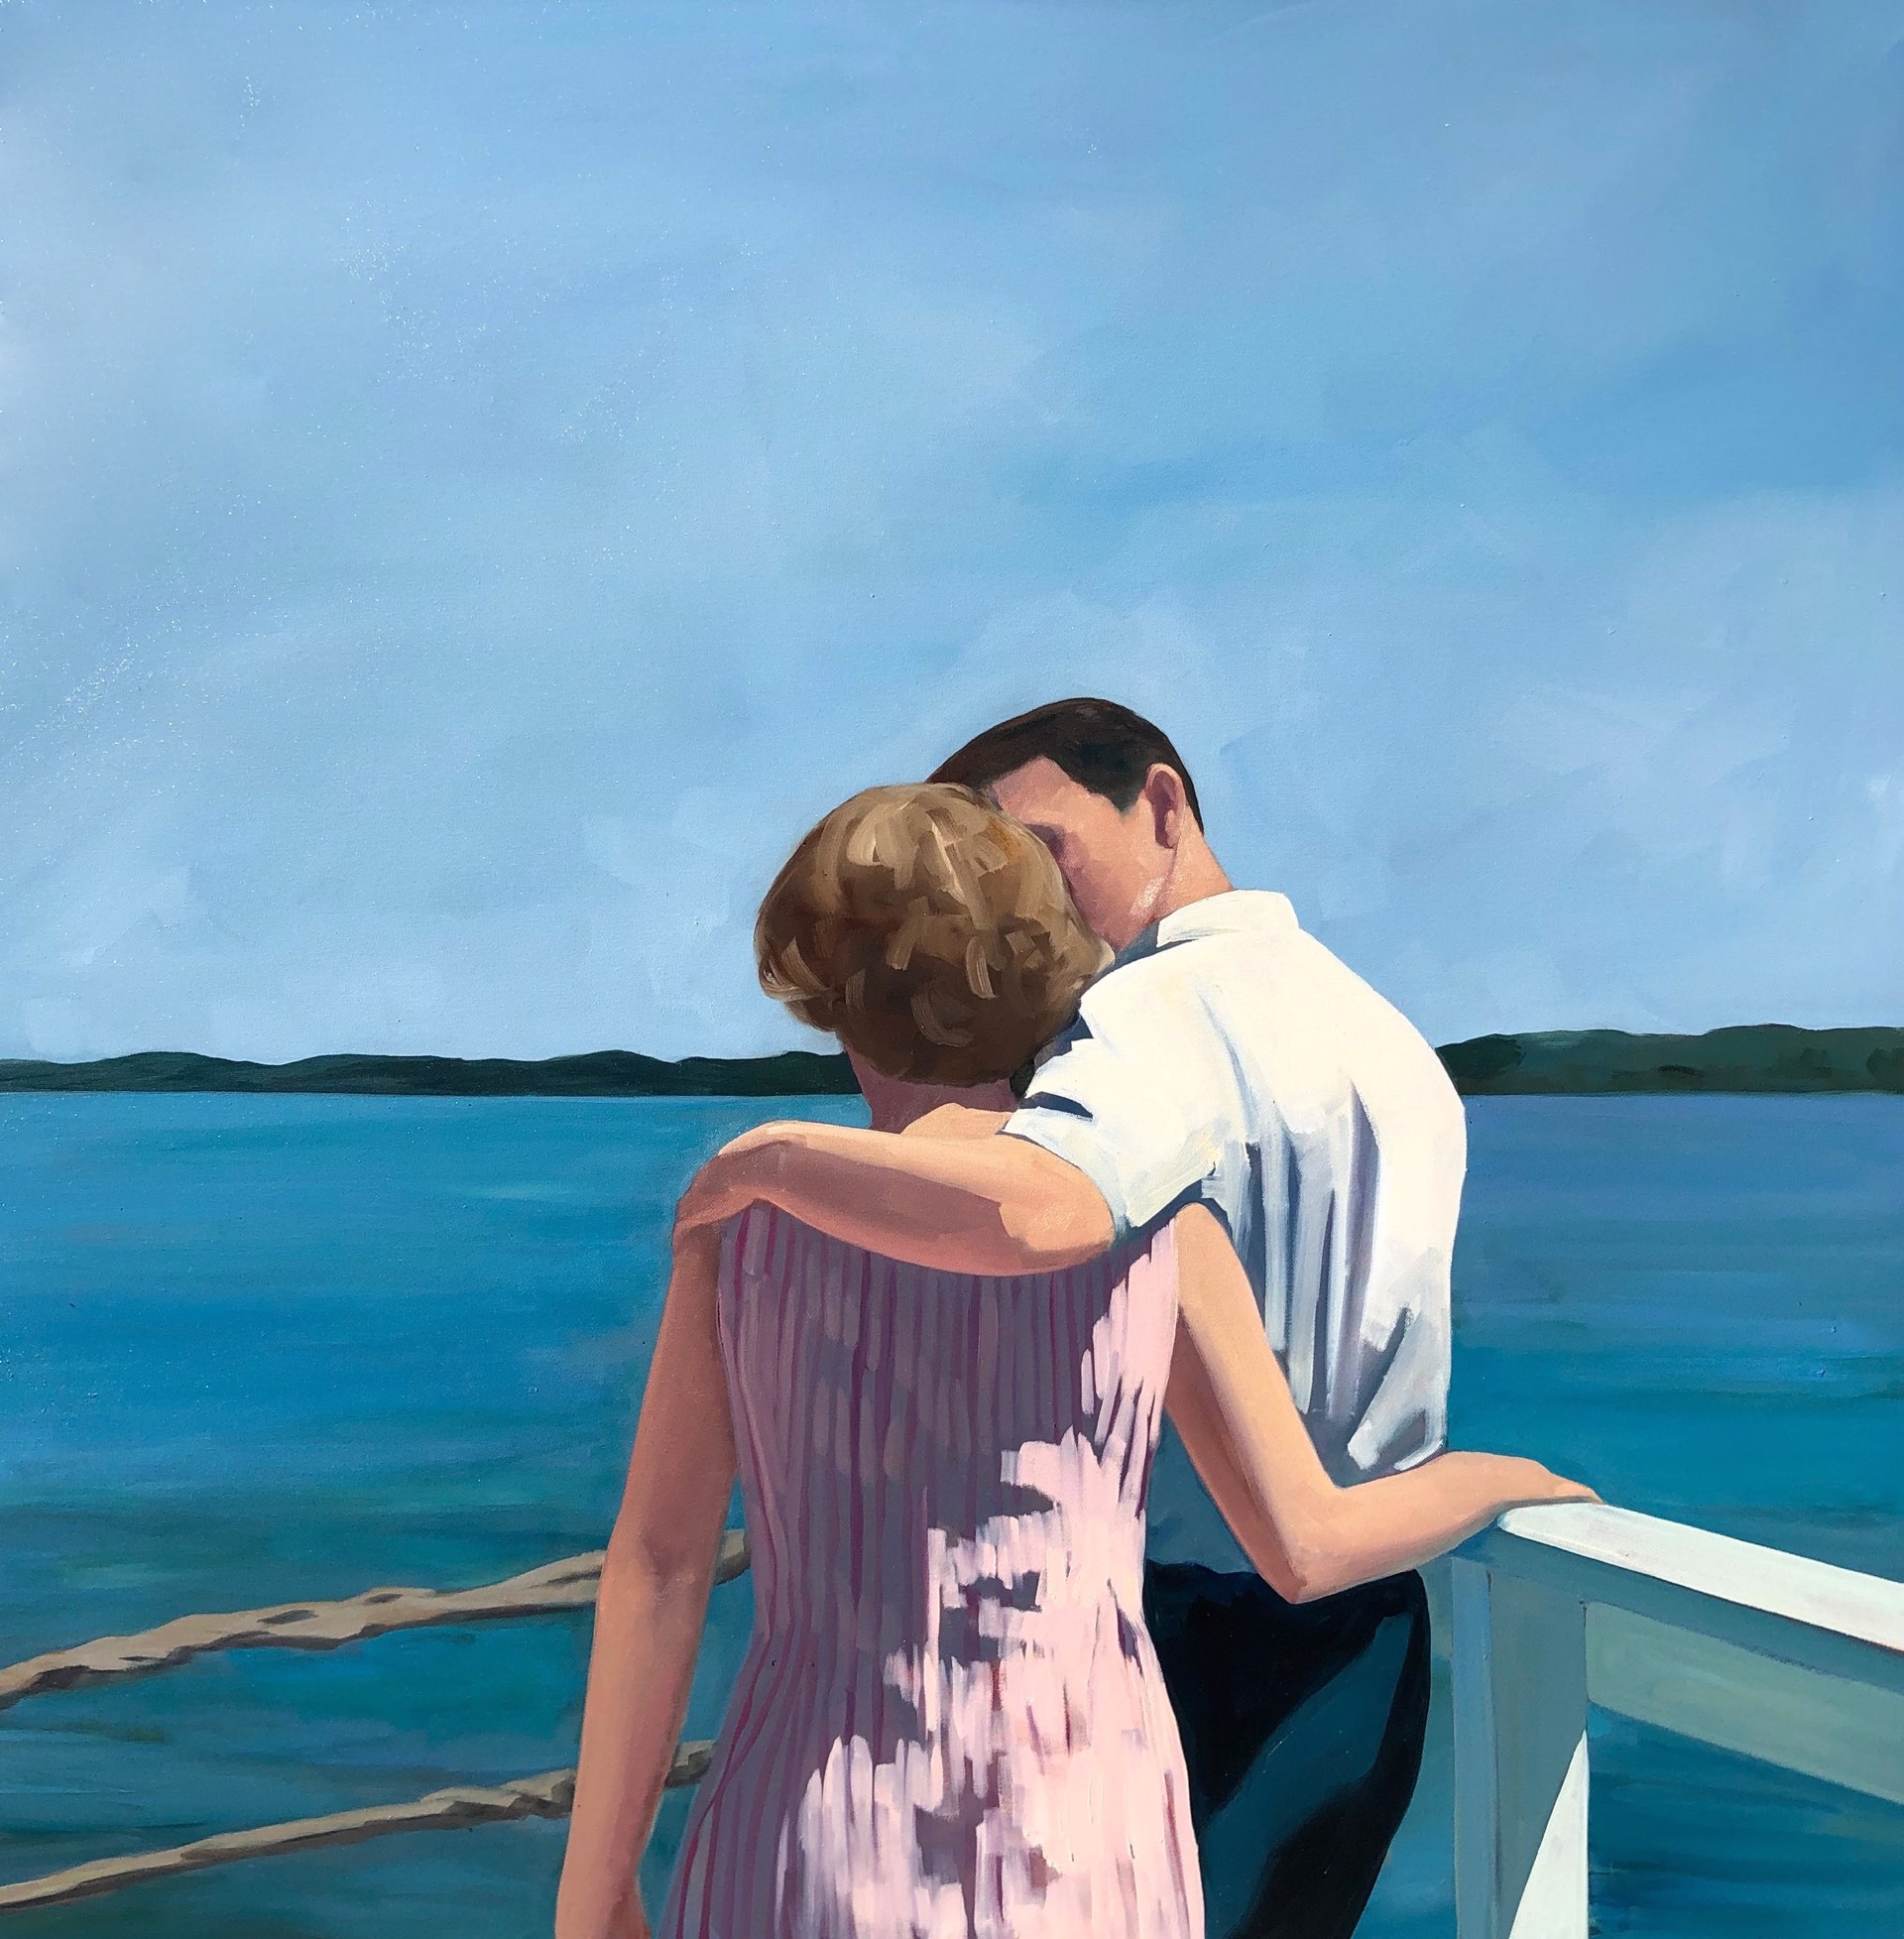 Summers with You by Tracey Sylvester Harris